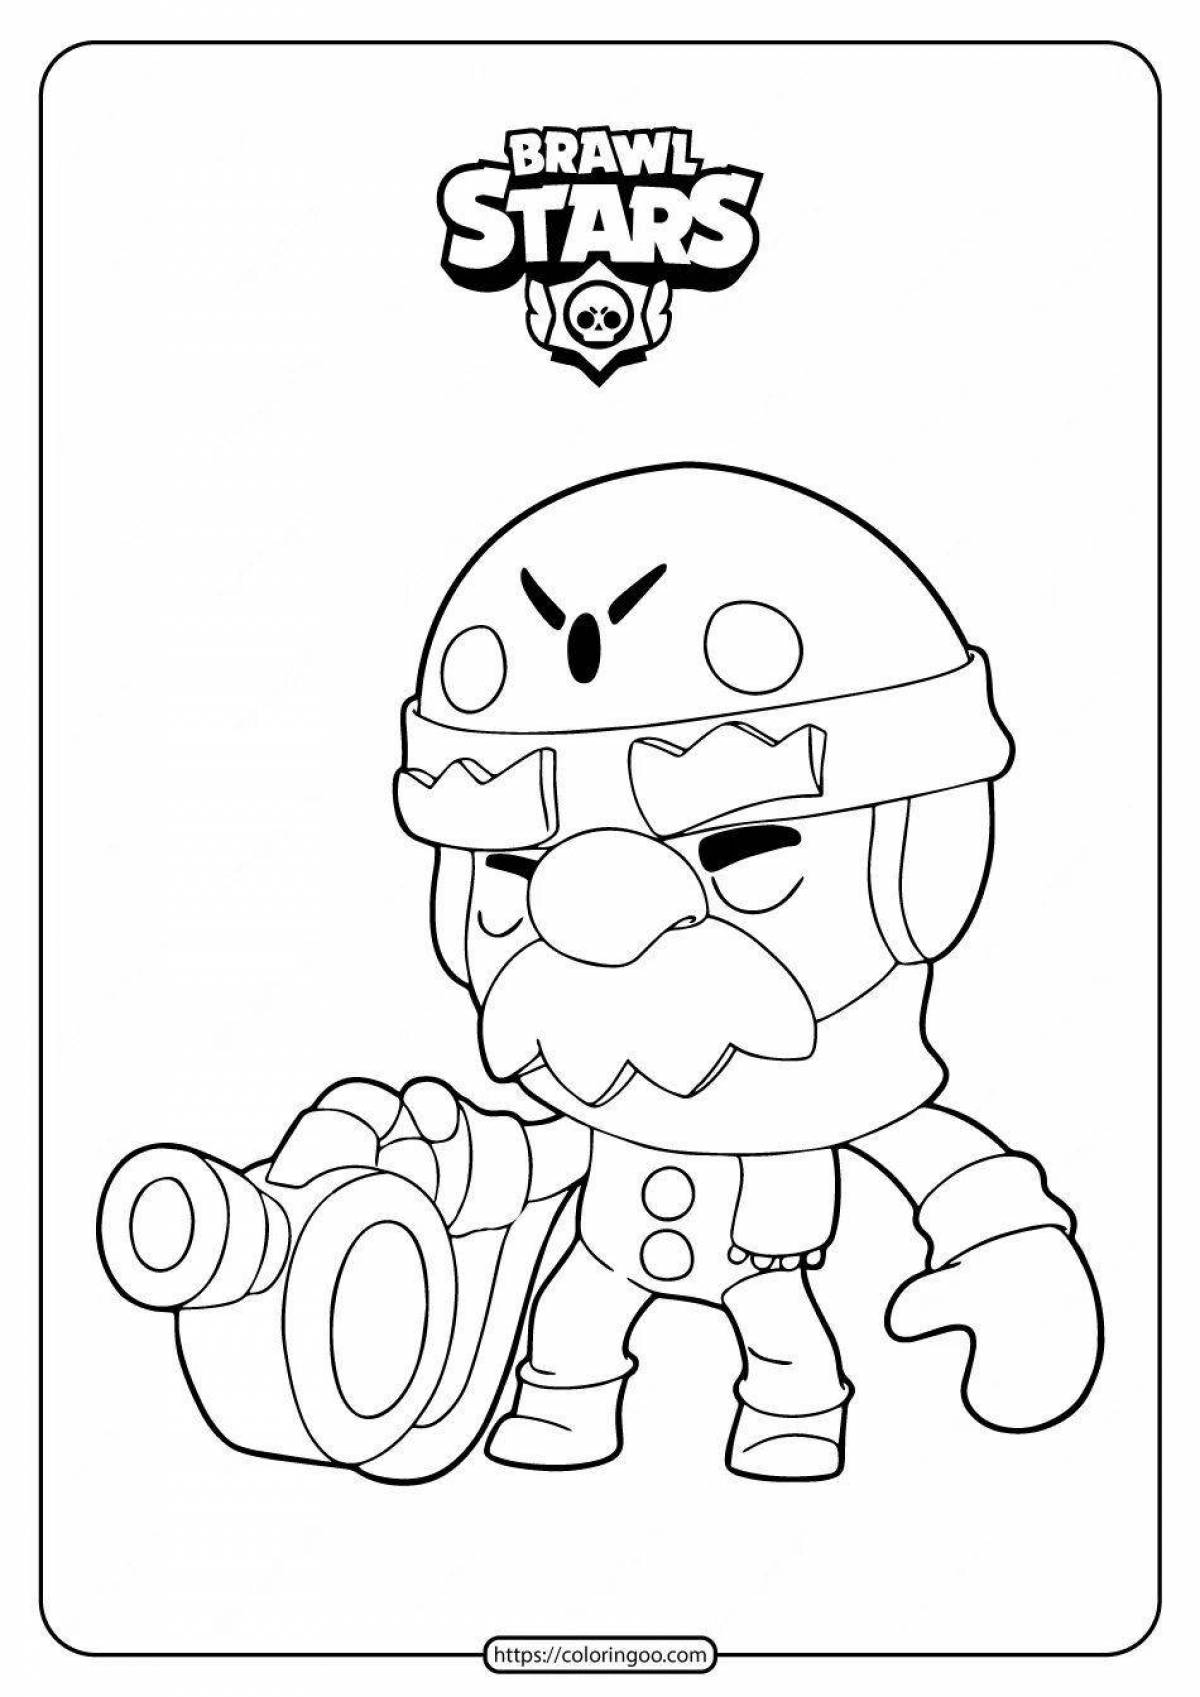 Great brawl stars coloring pages